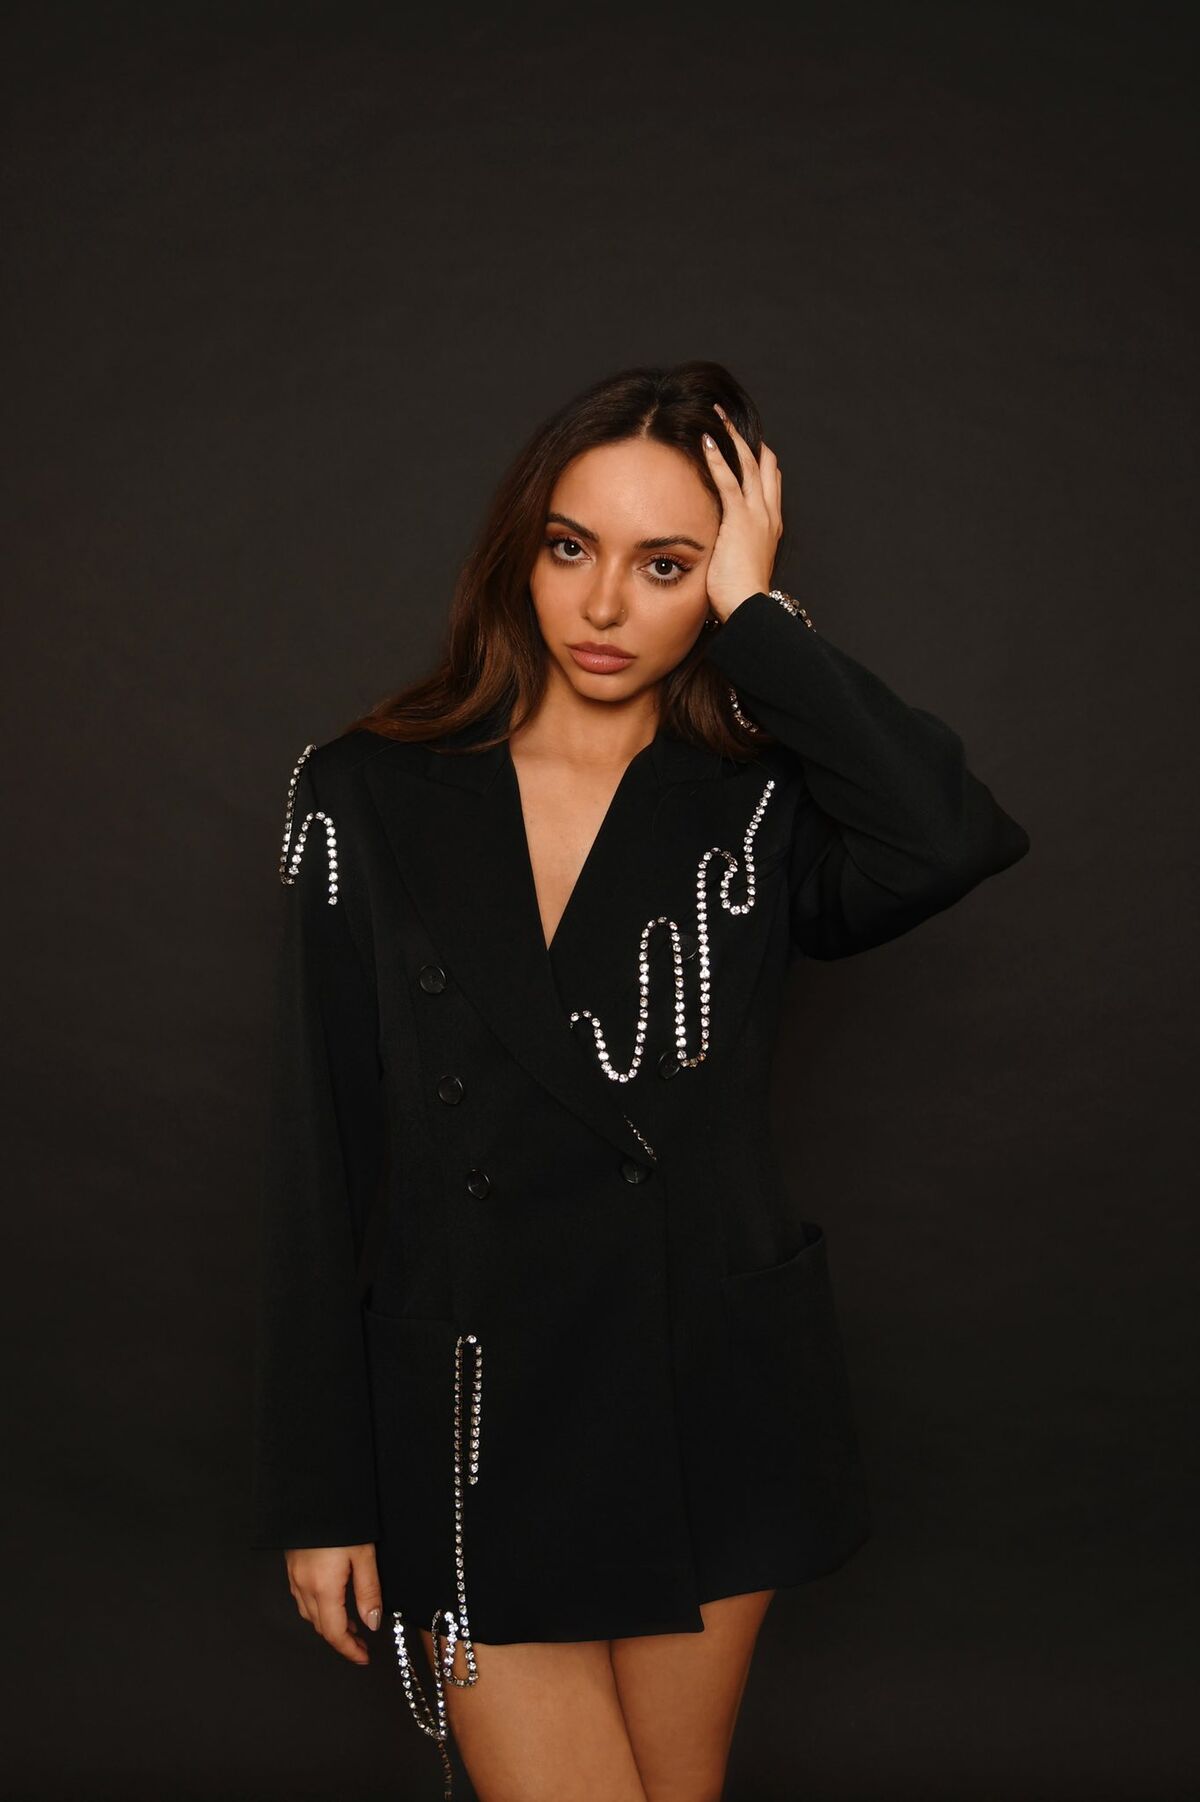 Little Mix's 'Break Up Song' is the Single Life Anthem You Need – Read  Lyrics & Listen!, First Listen, Jade Thirlwall, Jesy Nelson, Leigh-Anne  Pinnock, Little Mix, Music, Perrie Edwards